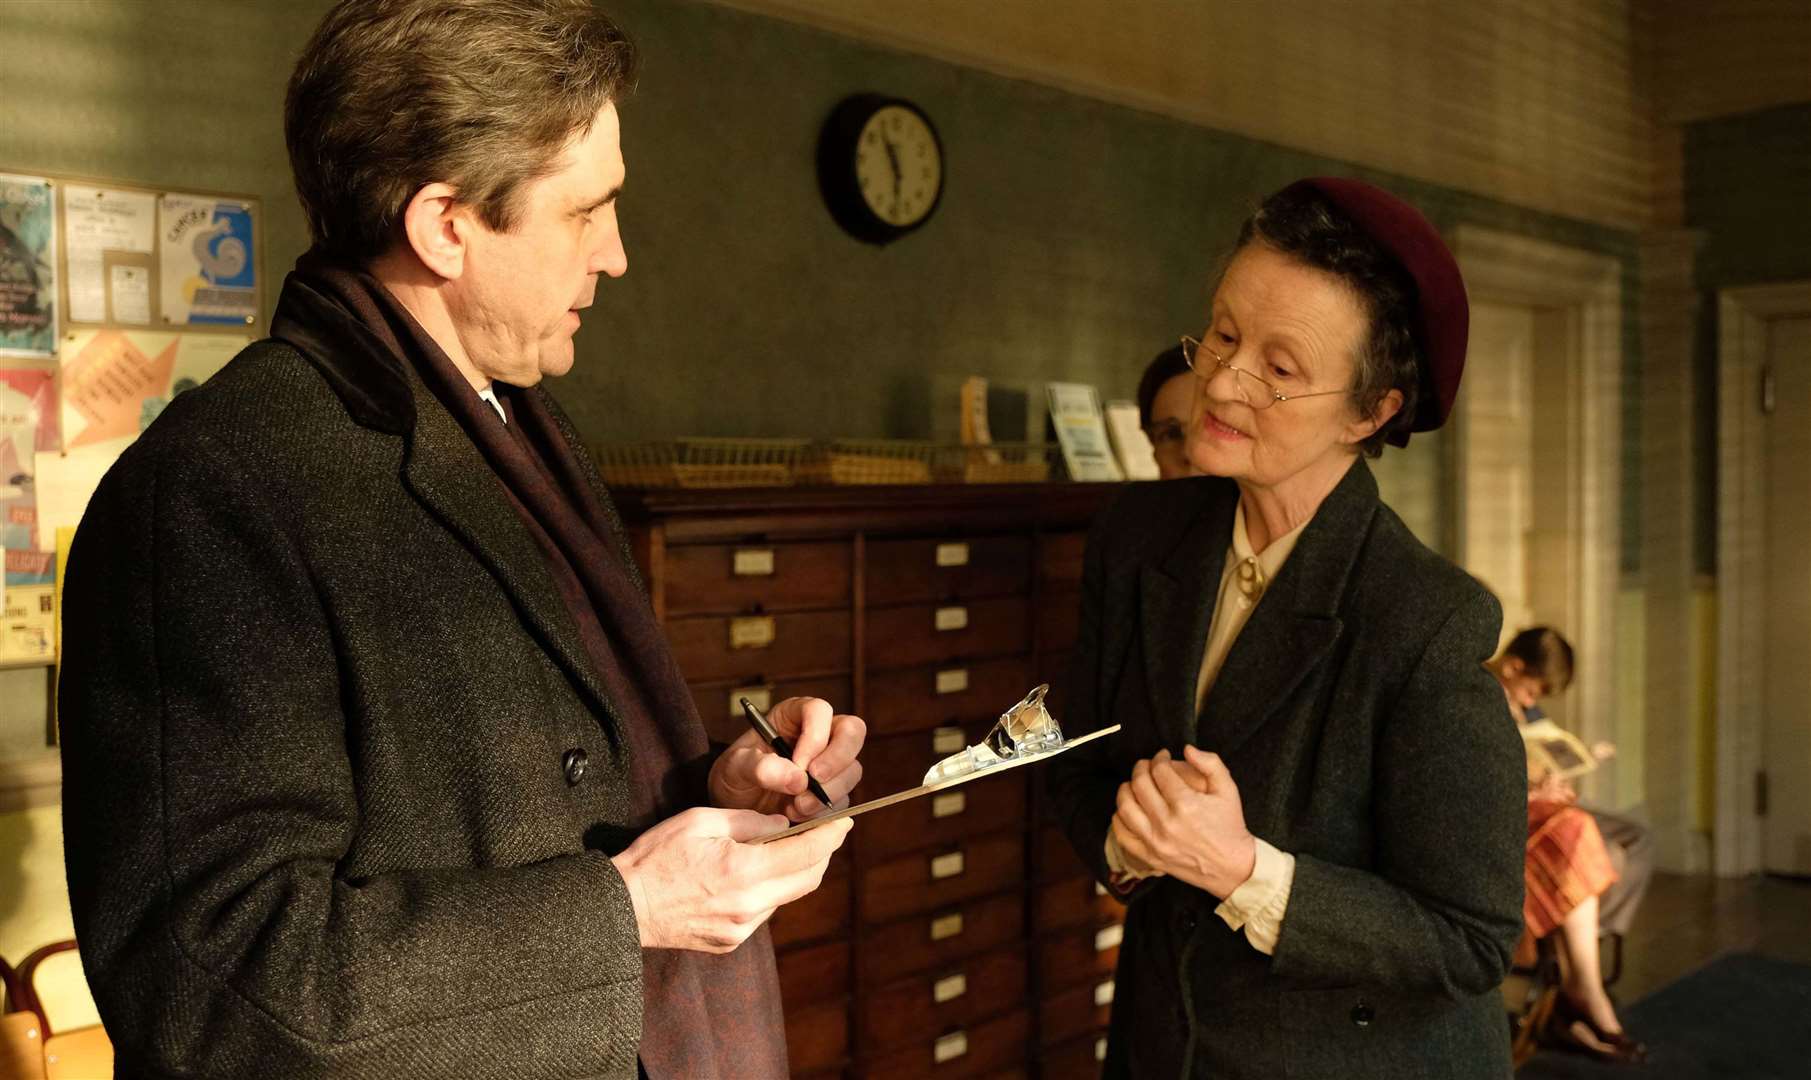 Stephen McGann as Dr Patrick Turner and Georgie Glen as Miss Higgins in the new series of Call the Midwife. Picture: PA Photo/BBC/Neal Street Productions/Ollie Upton